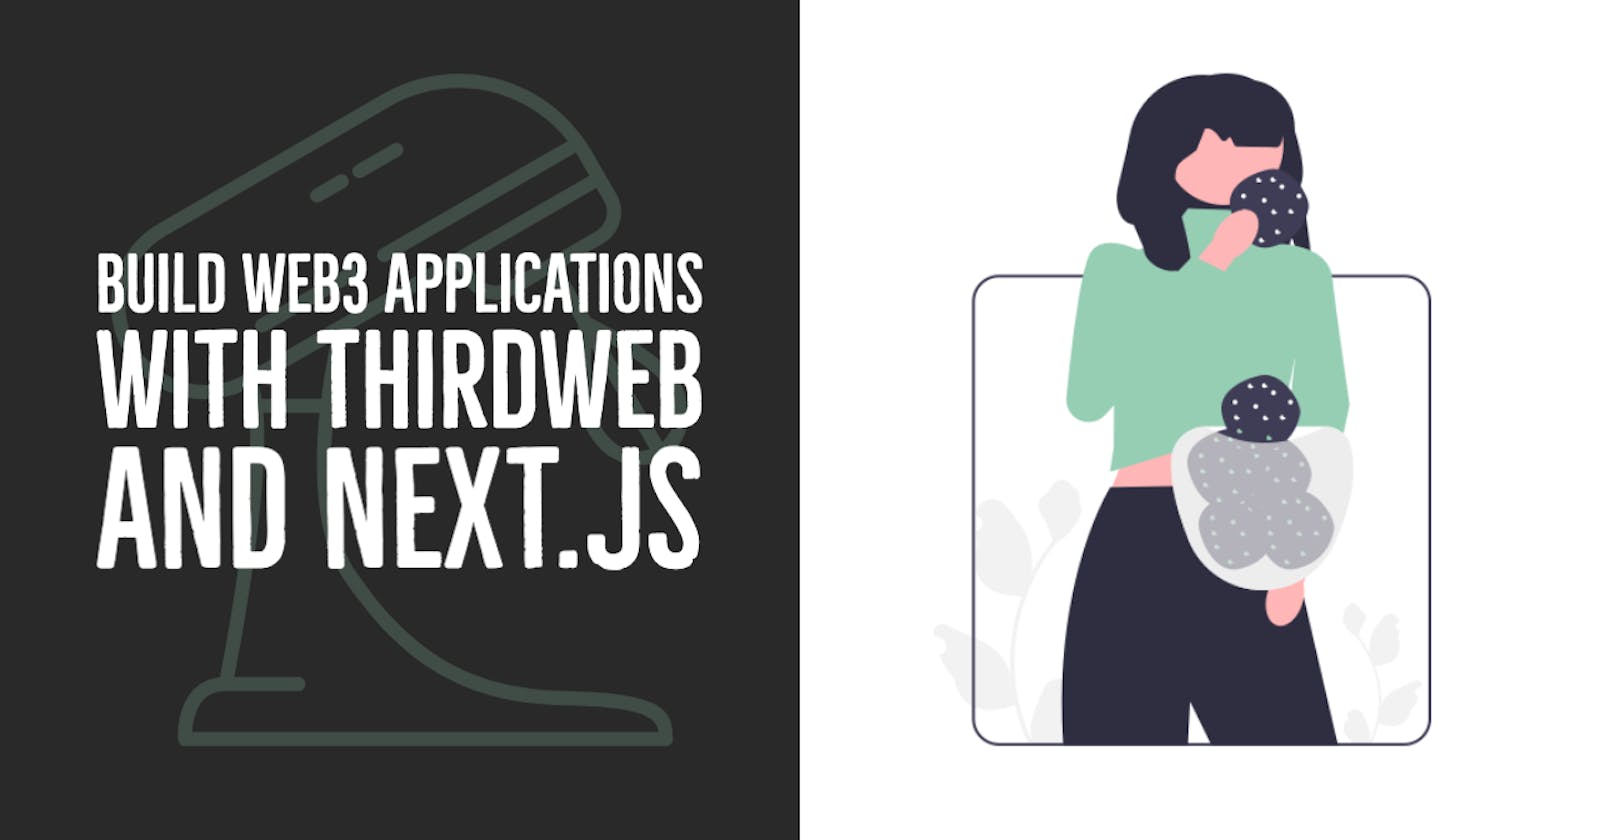 Introduction: Build Web3 Applications With thirdweb and Next.js